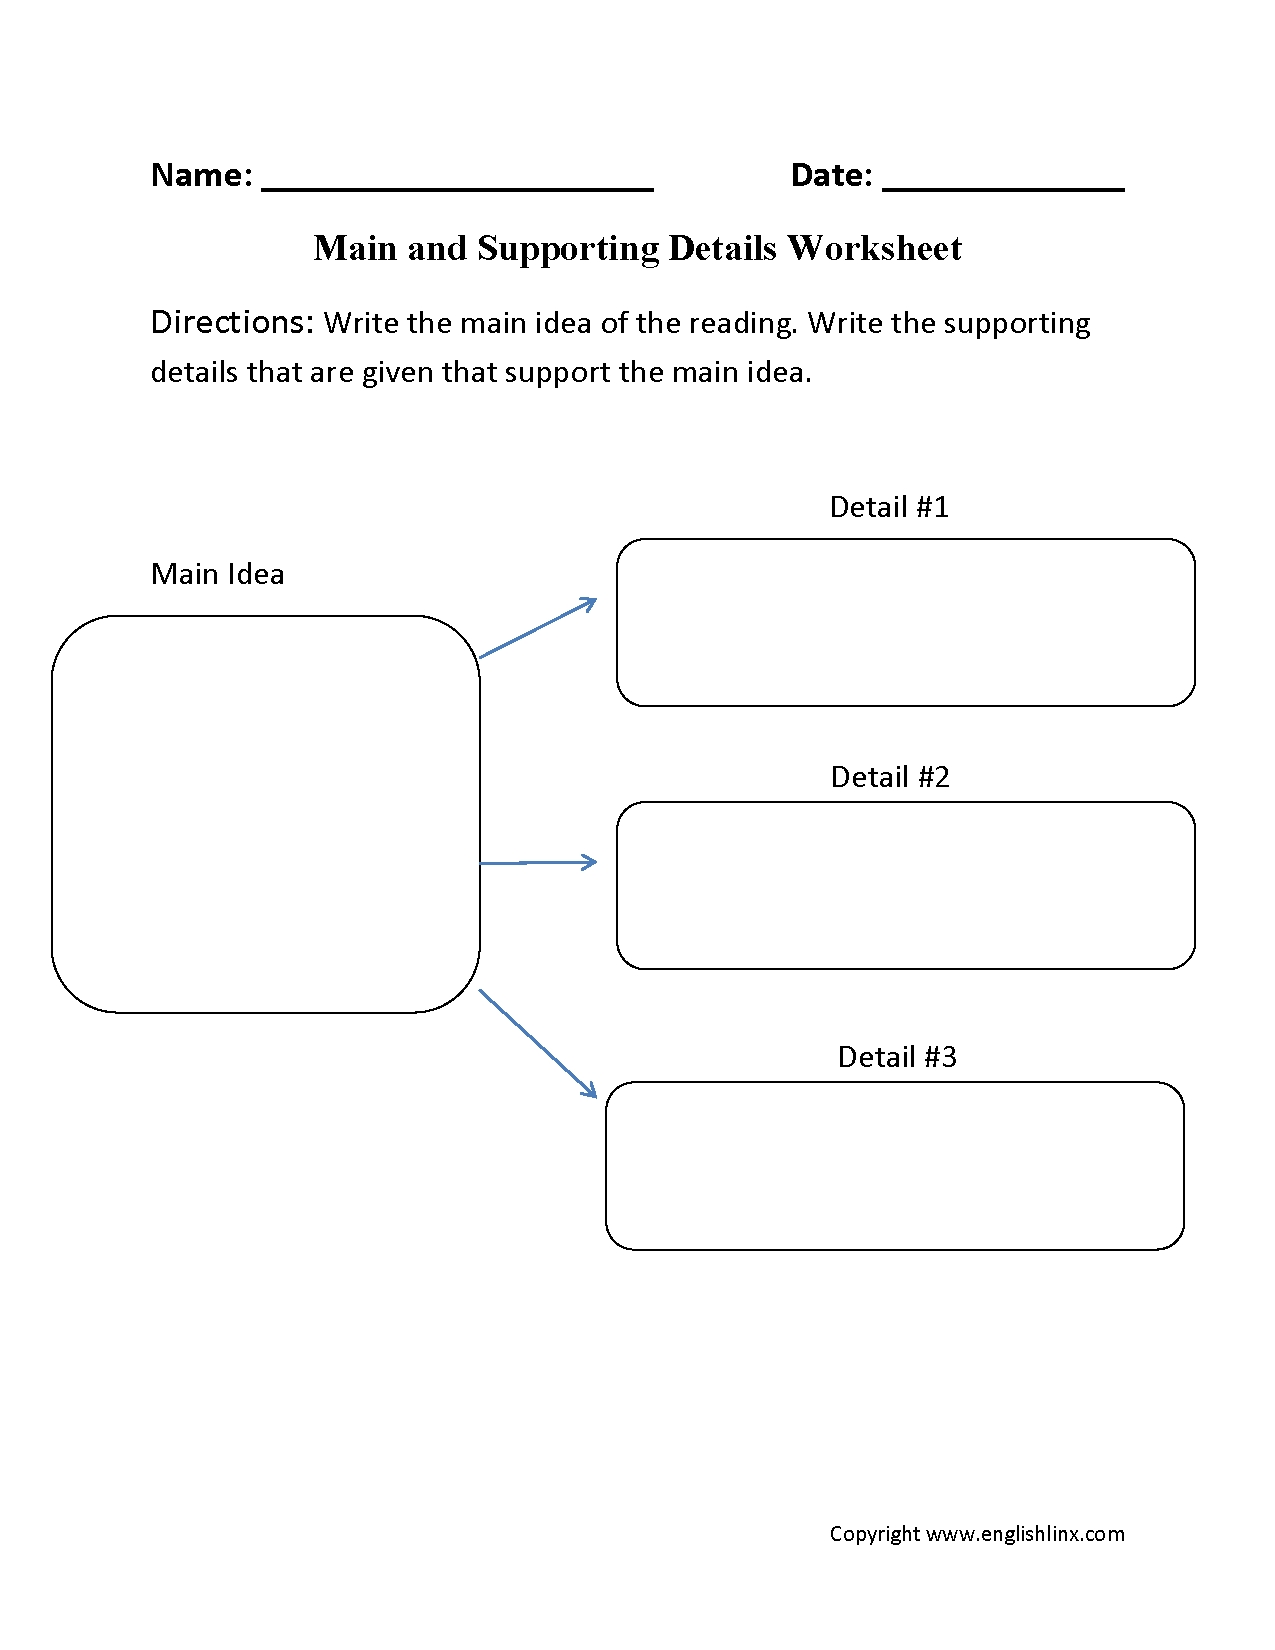 10 Most Popular Main Idea And Supporting Details Graphic Organizer main idea worksheets main idea and supporting details worksheet 1 2023